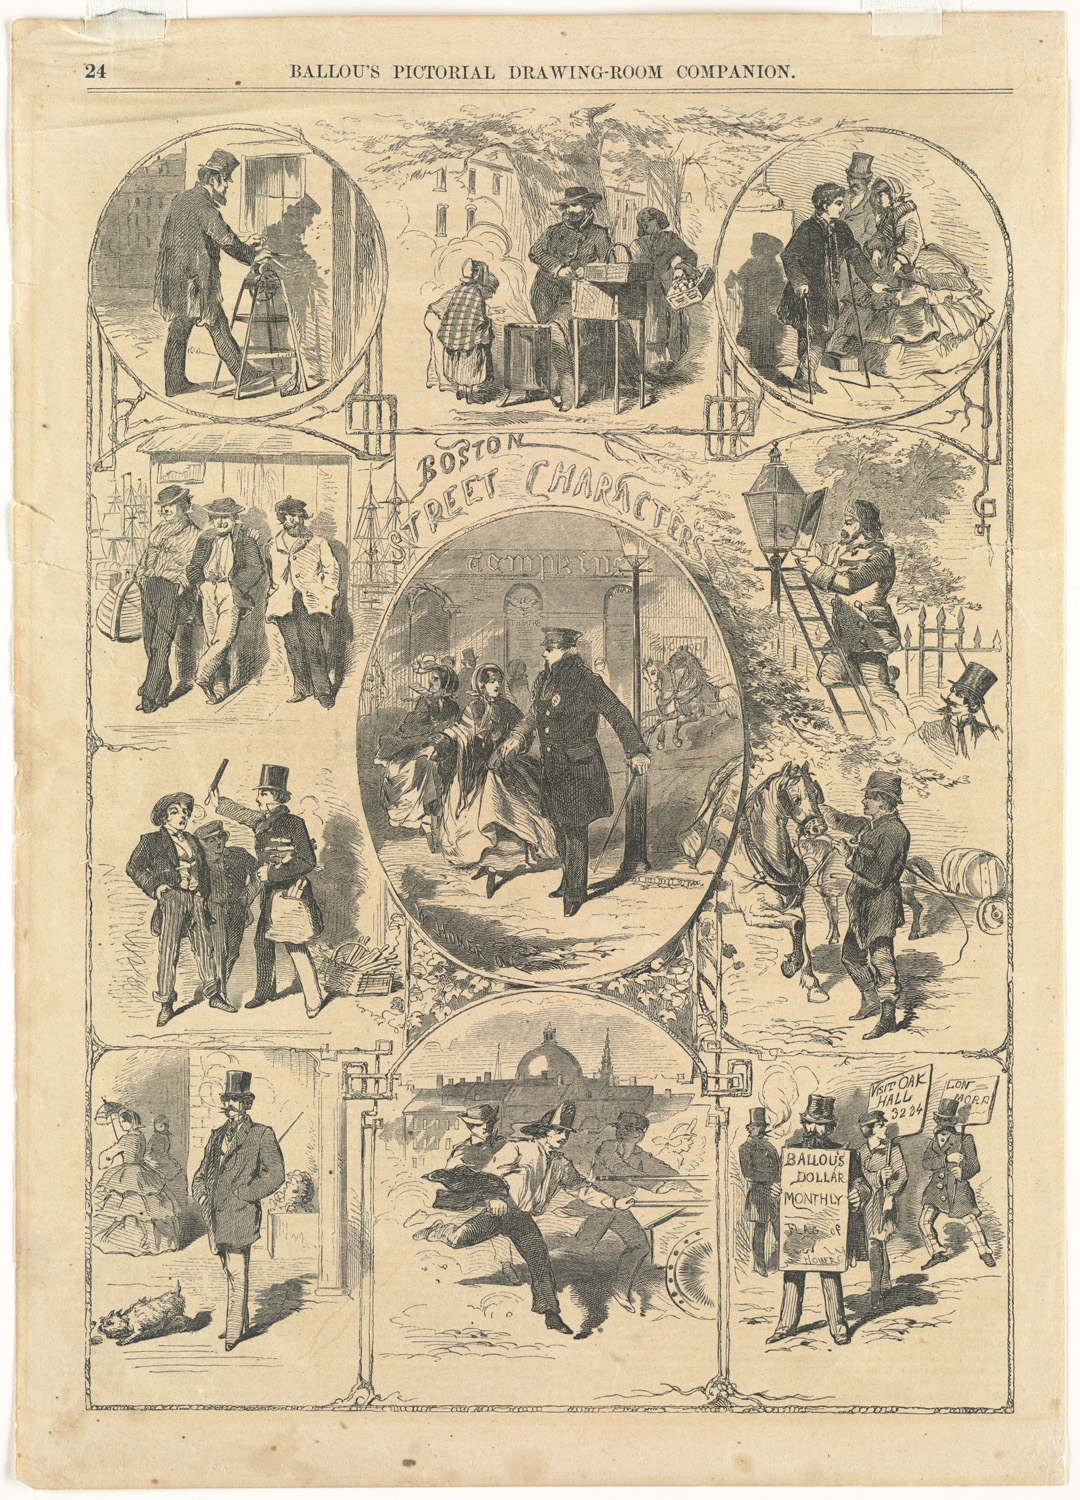 a old advertit for a company showing men in suits and costumes